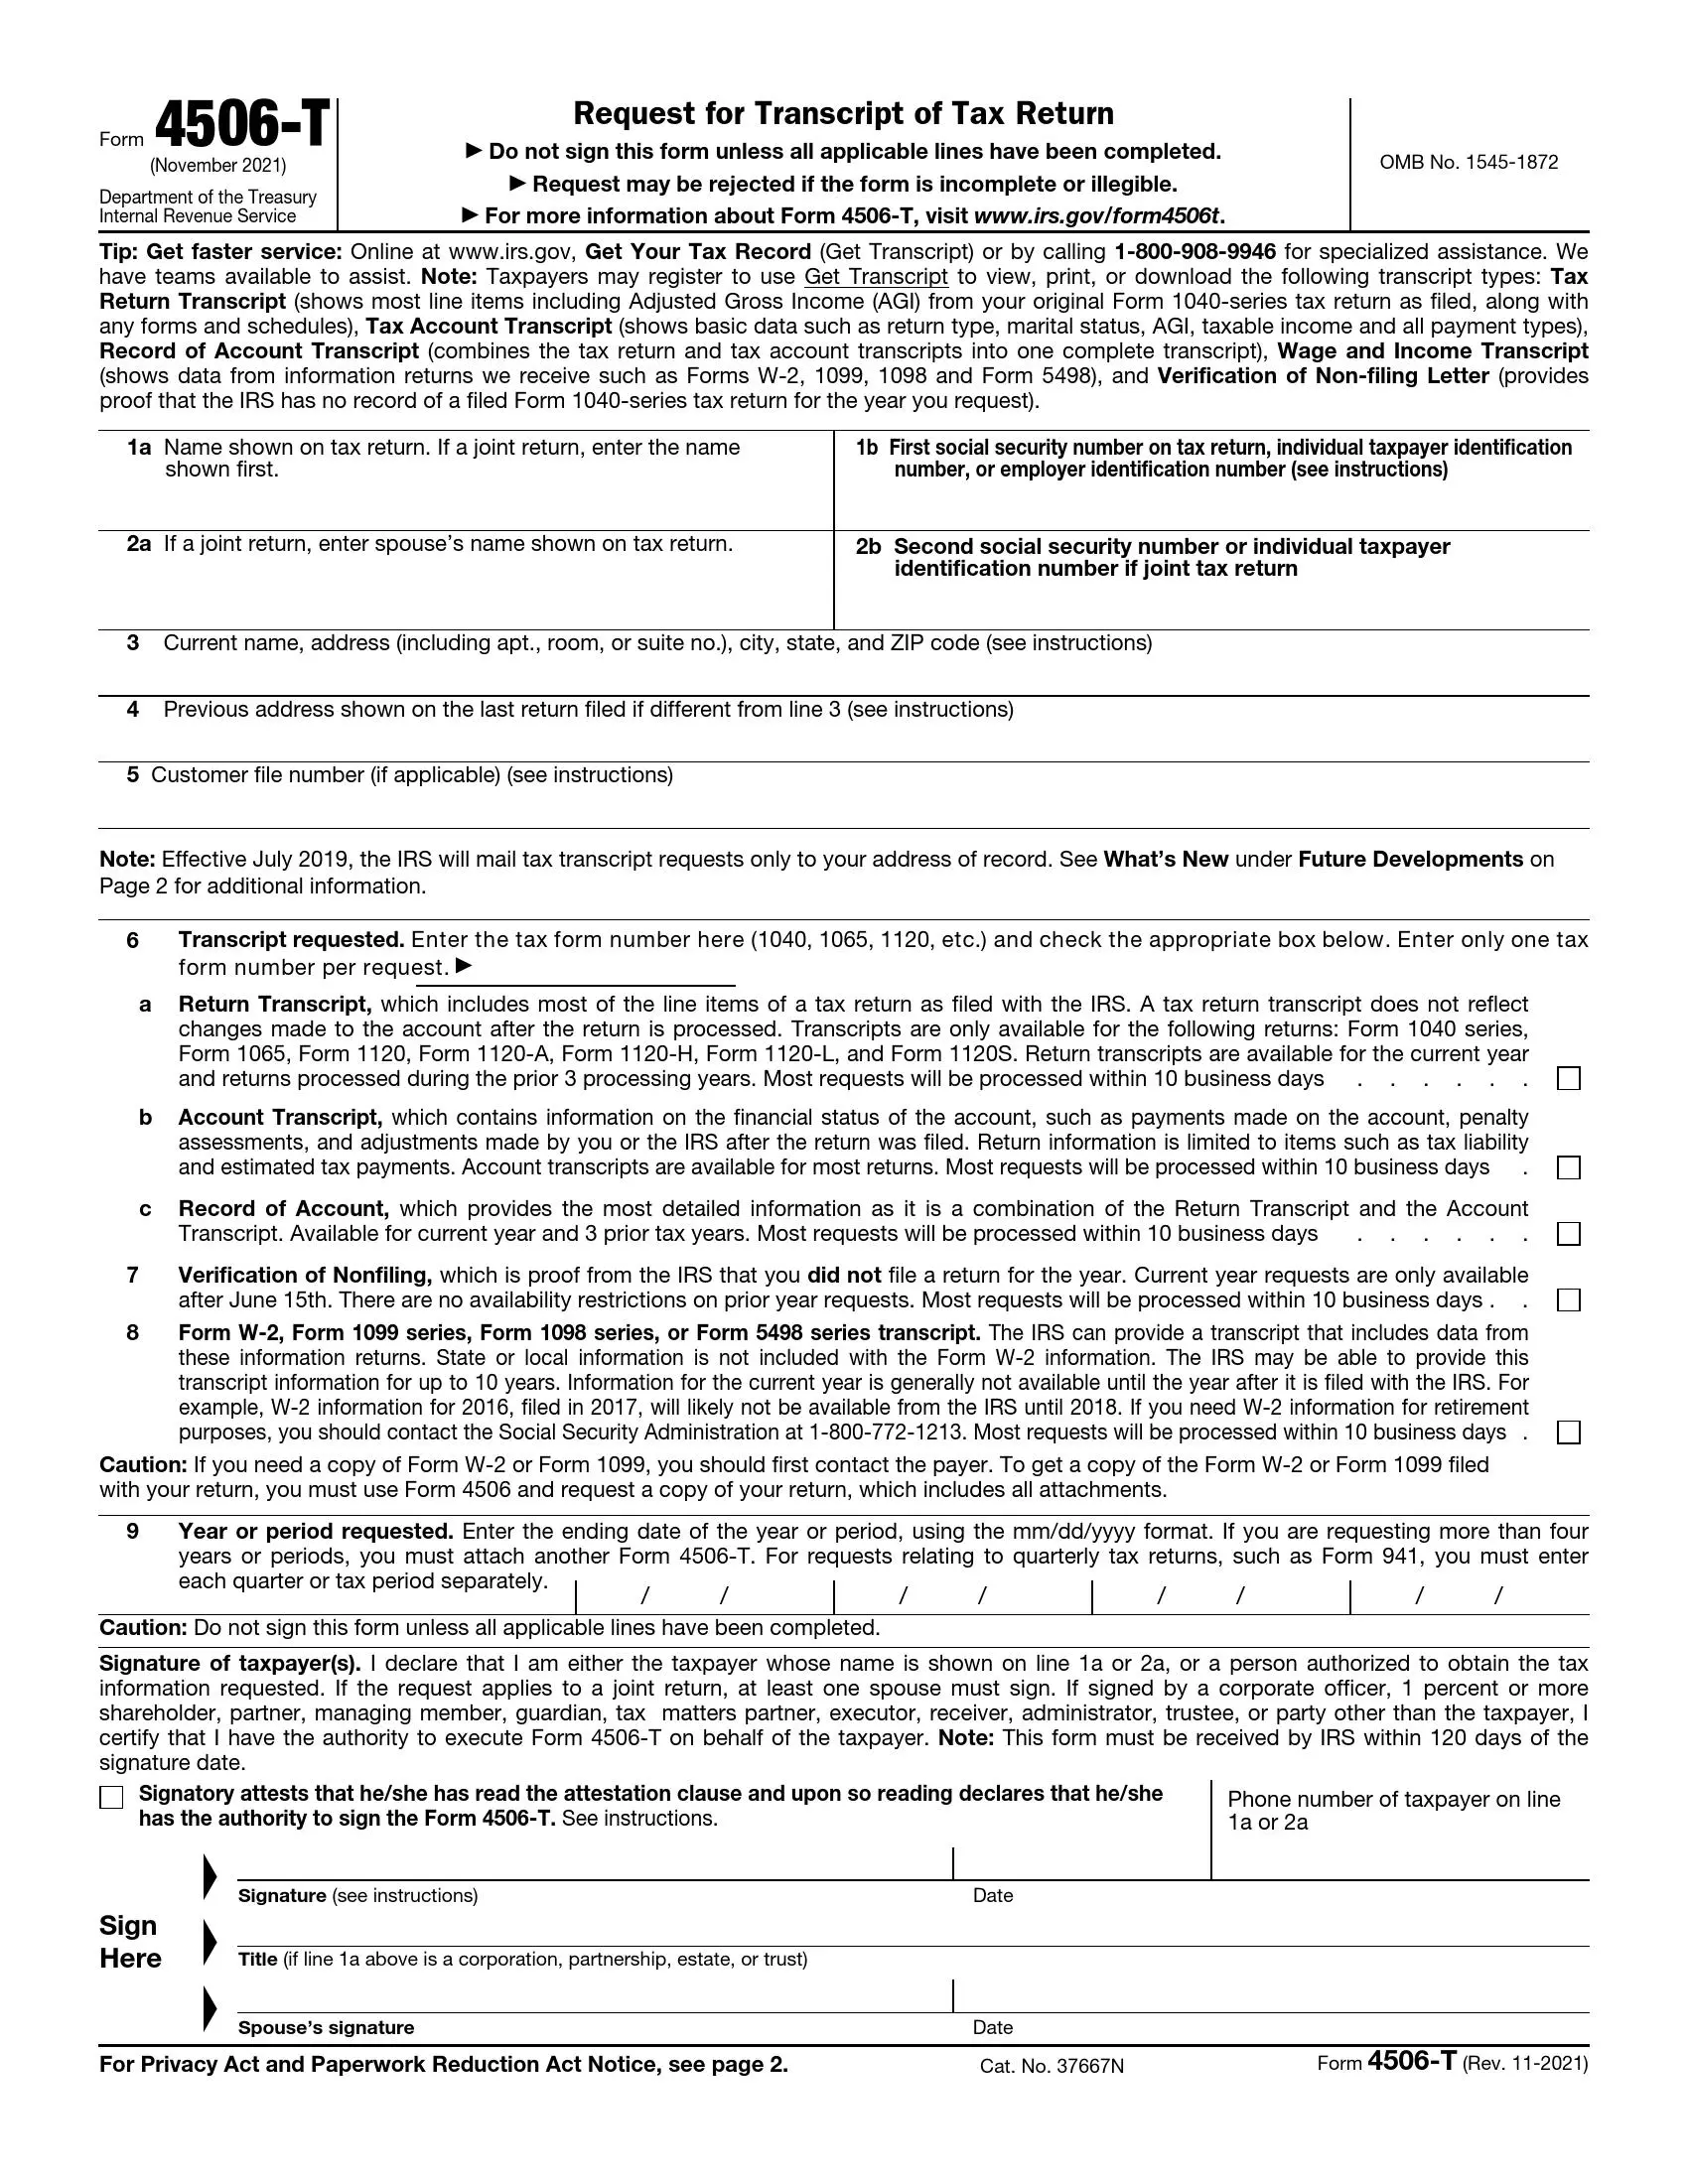 irs form 4506 t rev 11 2021 preview